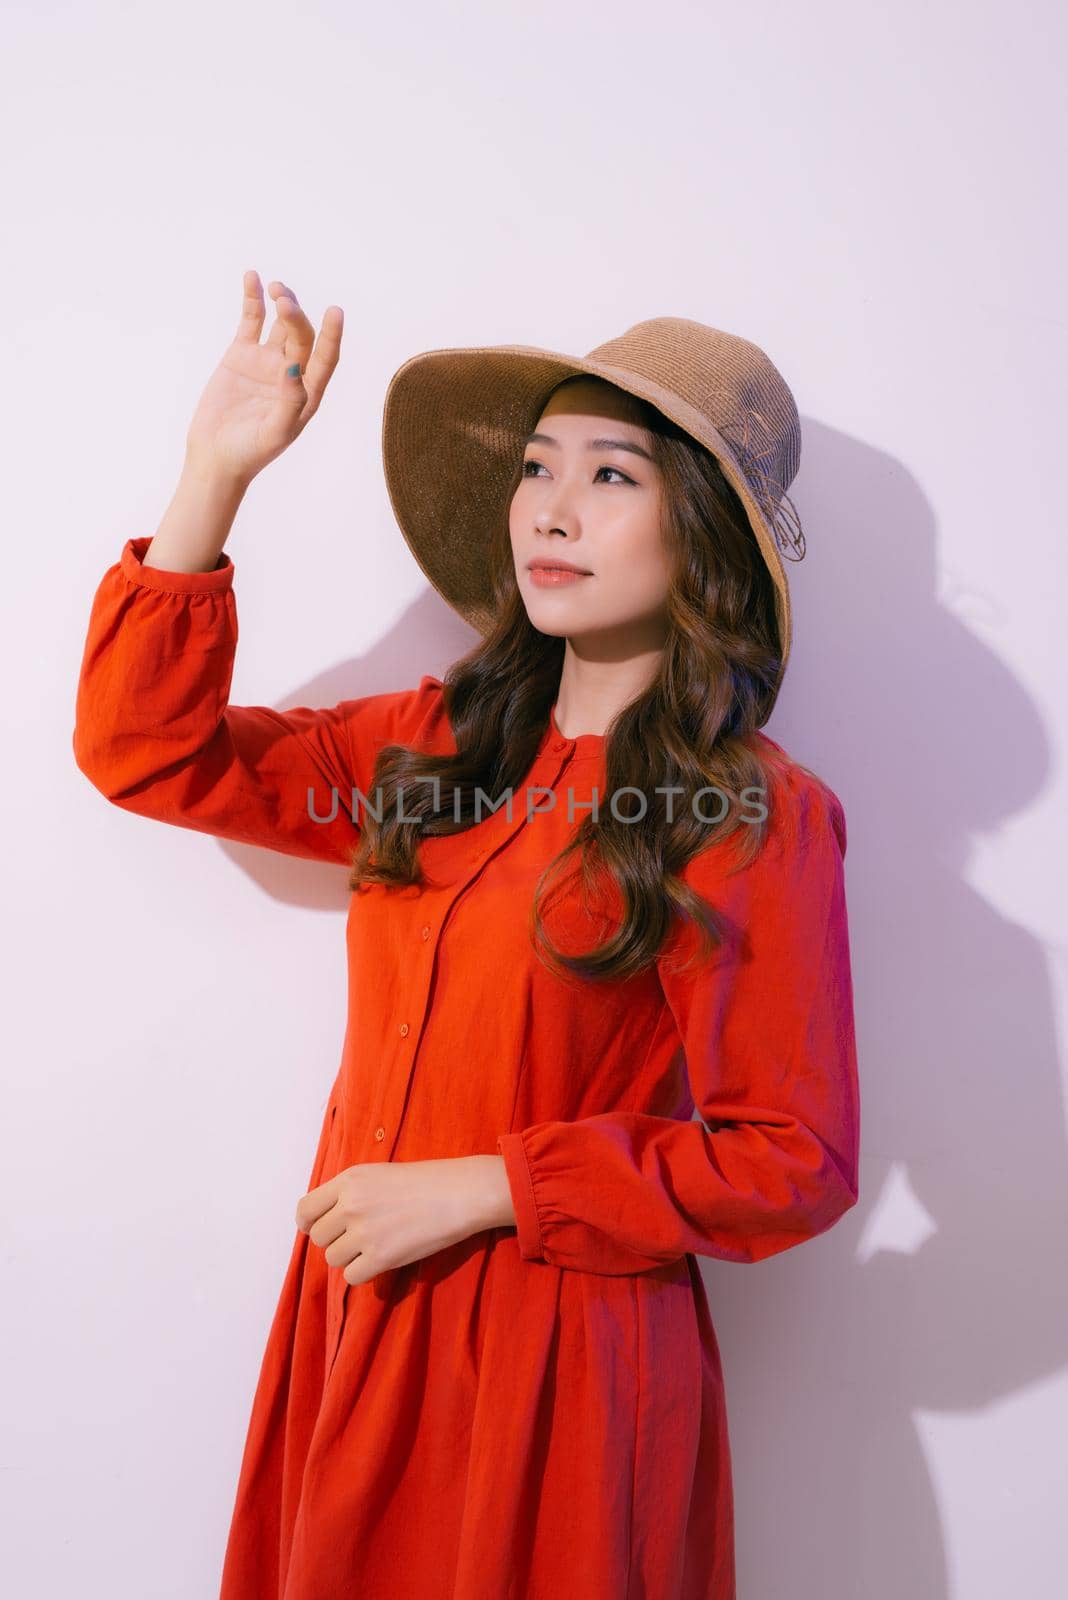 Portrait of a smiling attractive woman in summer dress and hat posing while standing and looking at camera isolated over pink background